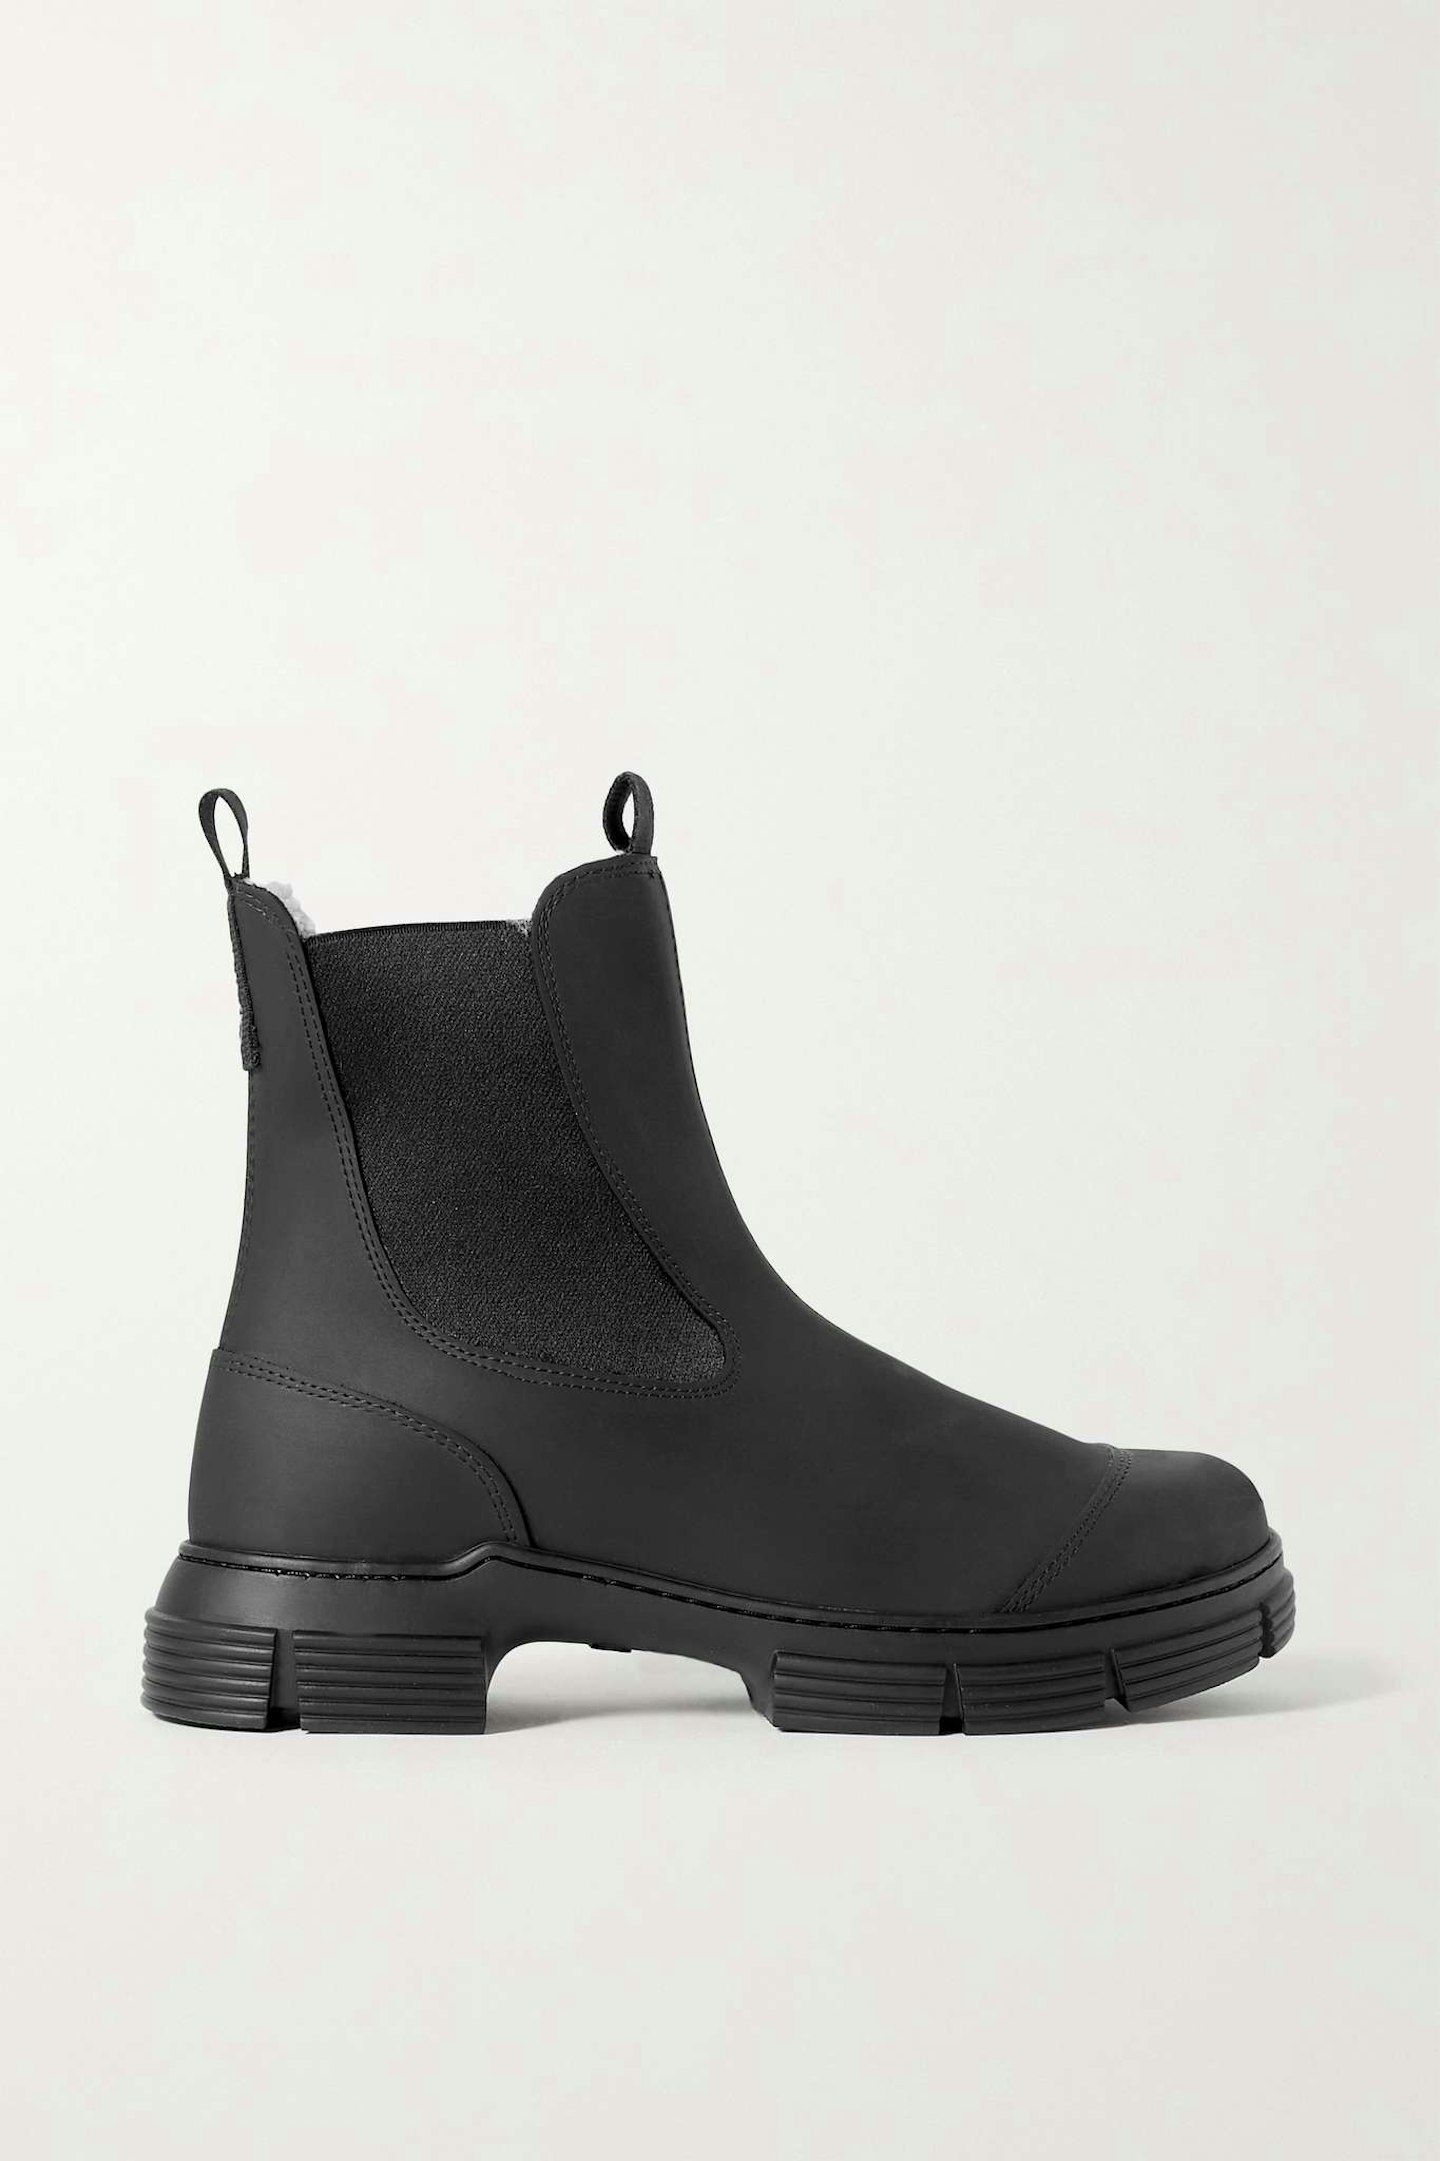 Ganni, Shearling-Lined Recycled Rubber Chelsea Boots